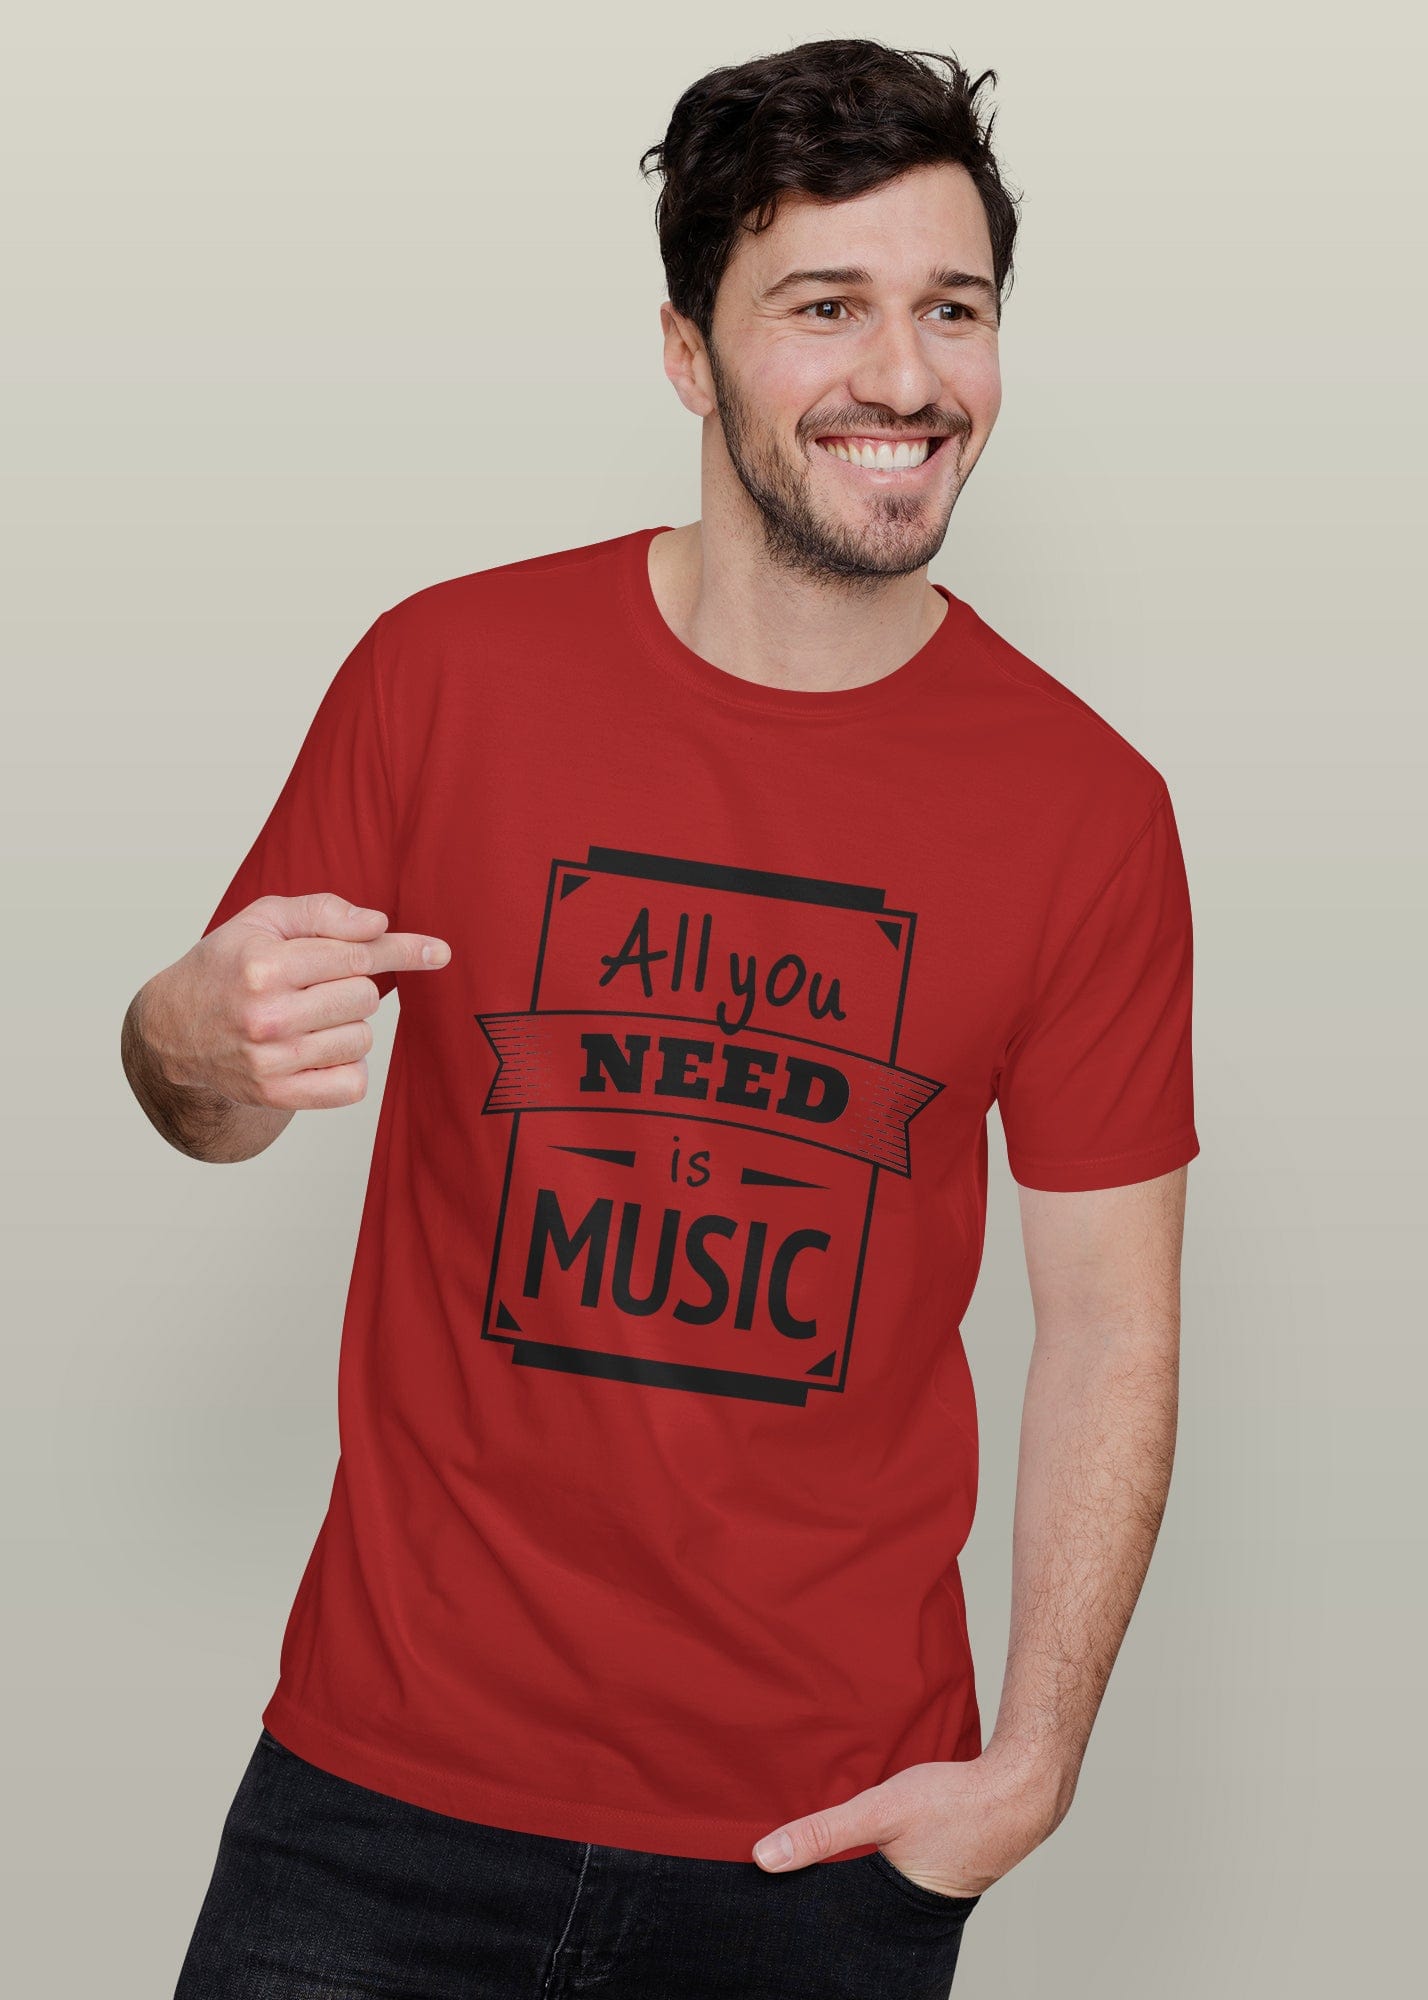 All You Need Is Music Printed Half Sleeve Premium Cotton T-shirt For Men